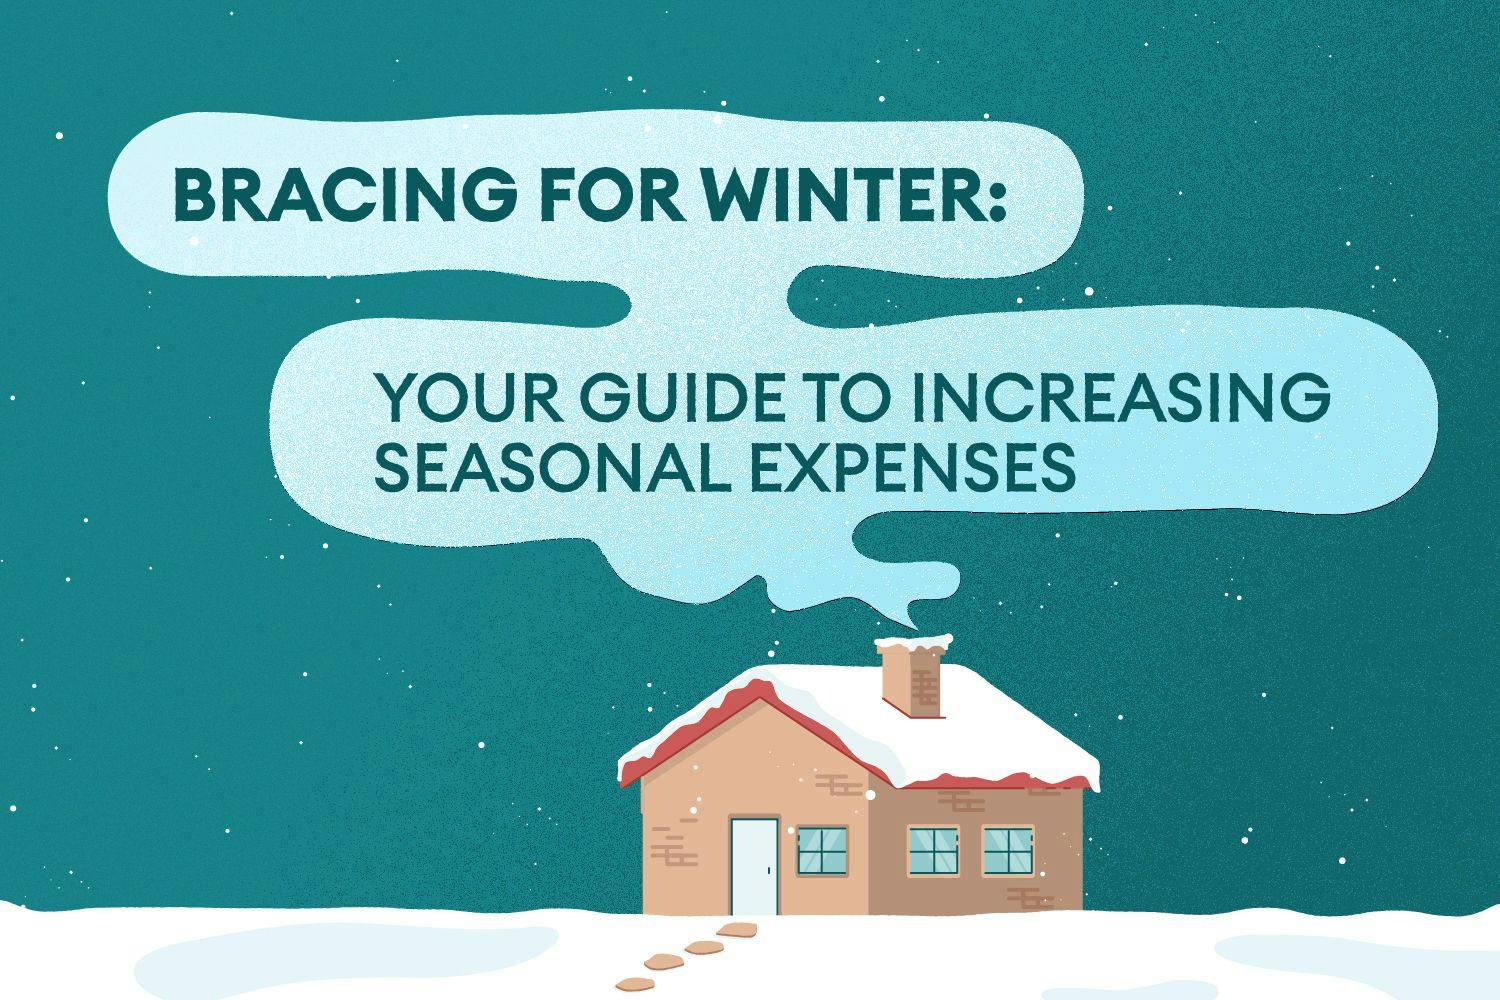 Title 'Bracing for Winter: Your Guide to Increasing Seasonal Expenses'